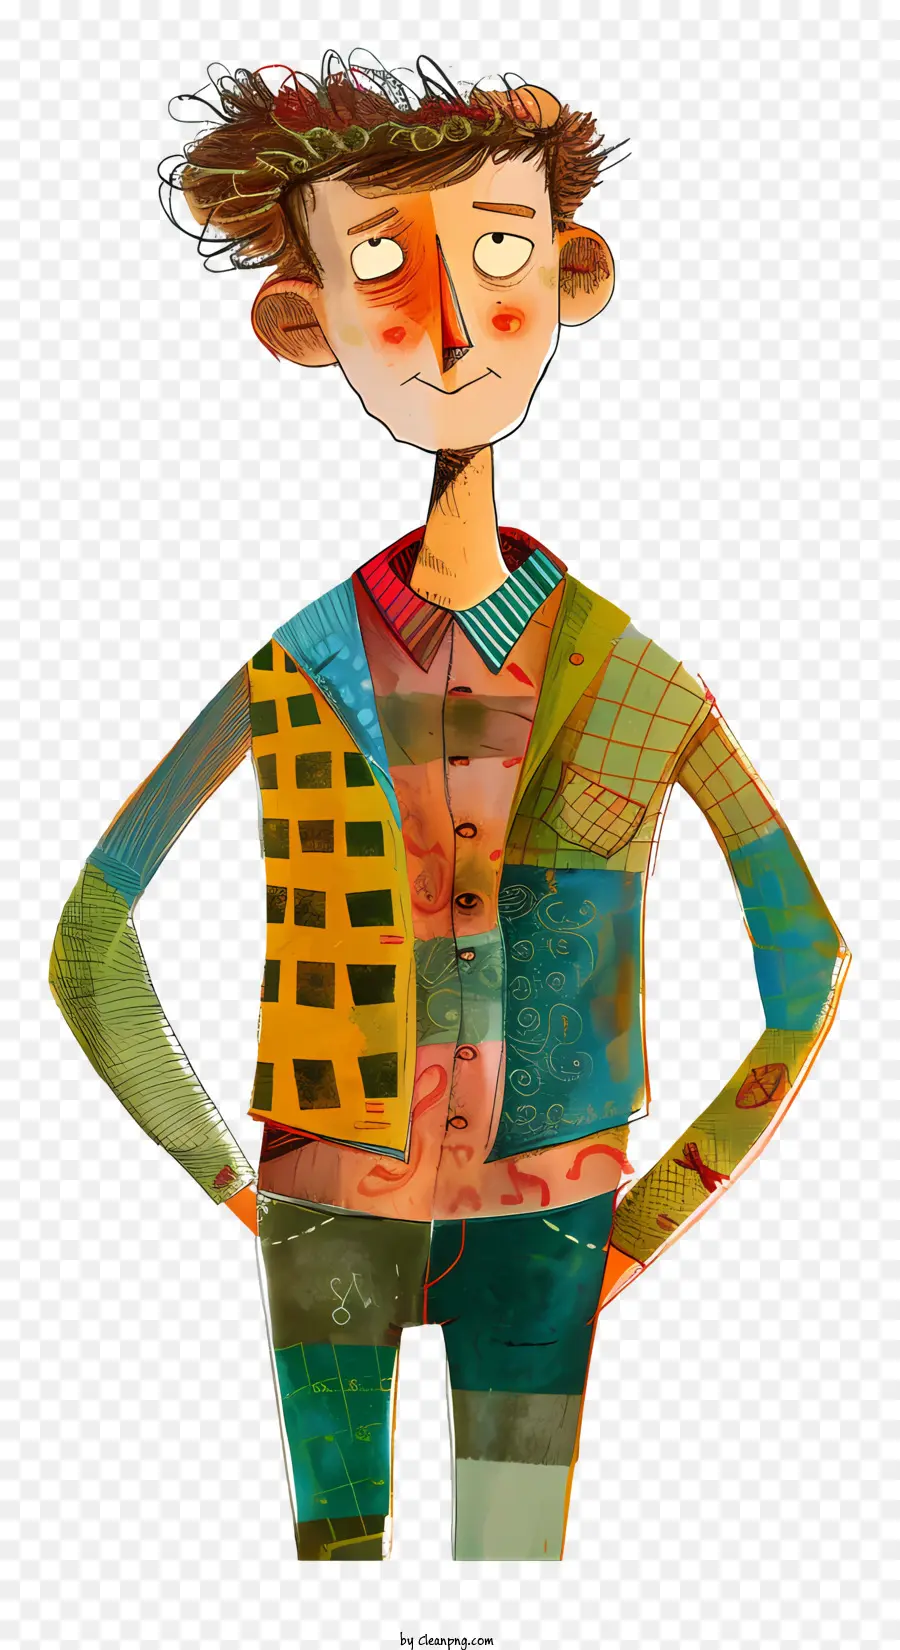 whimsical cartoon man painting man arms crossed striped shirt